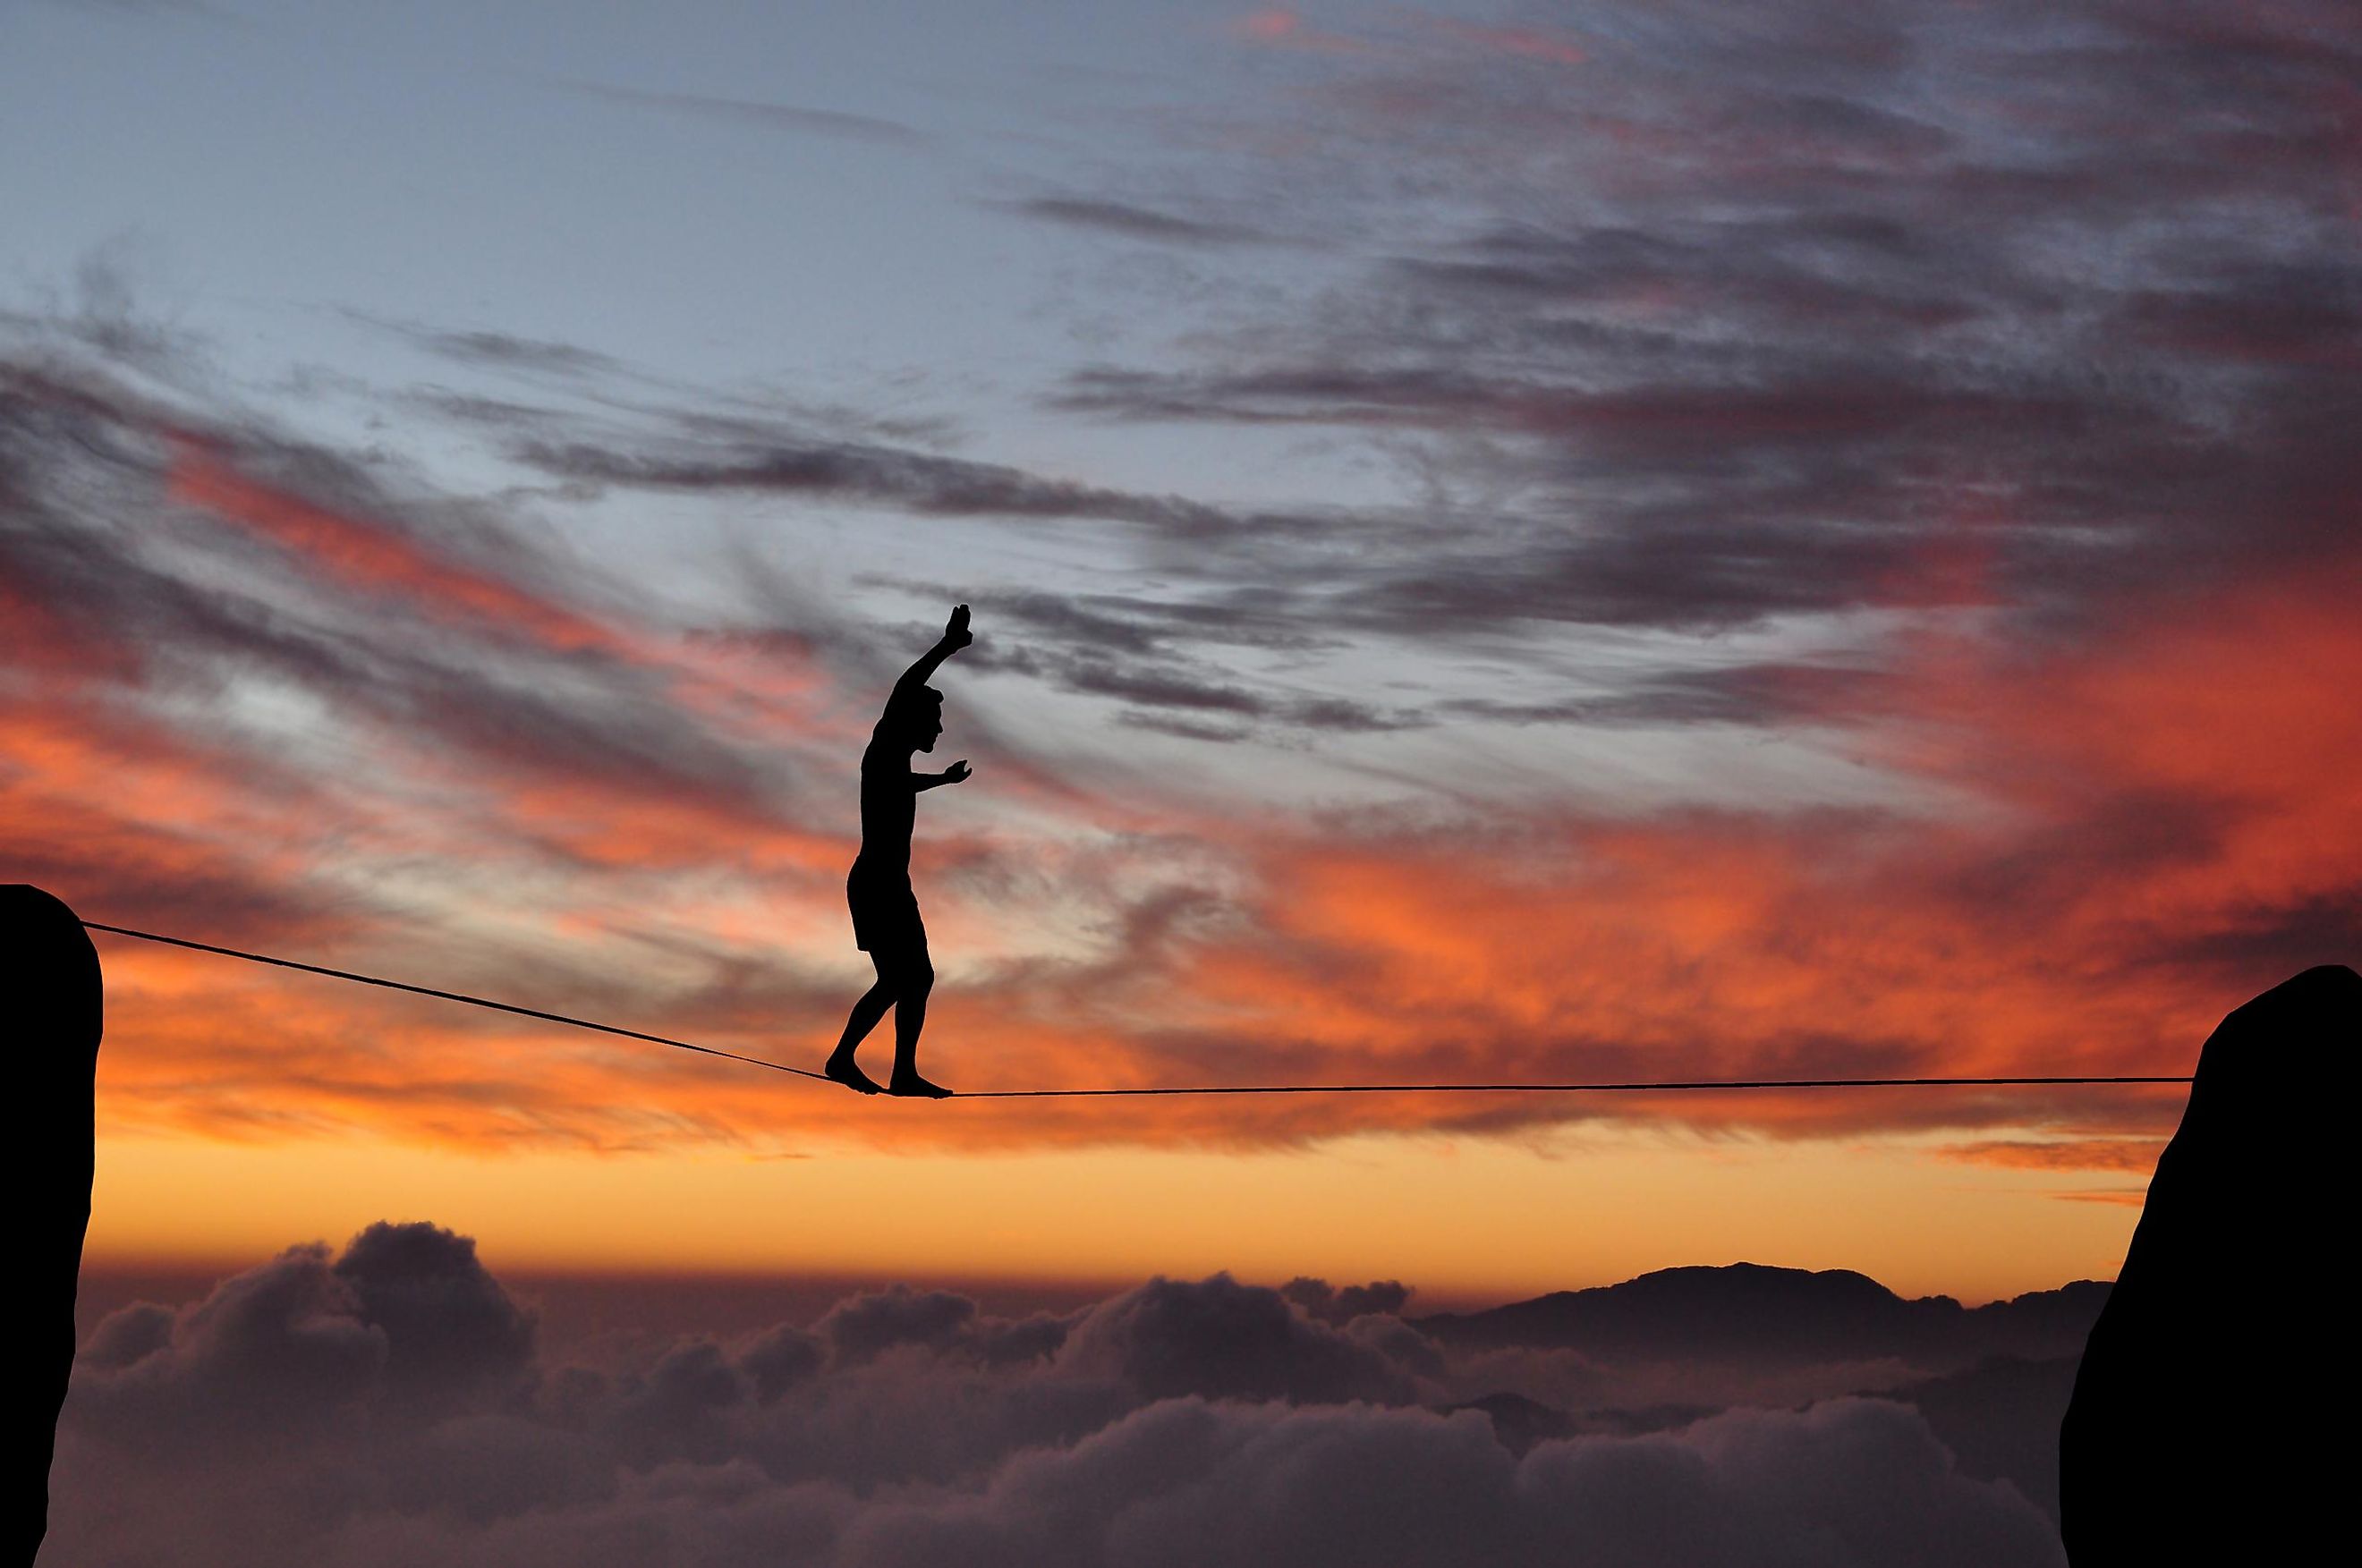 Silhouette of young man balancing on slackline high above clouds and mountains during sunset